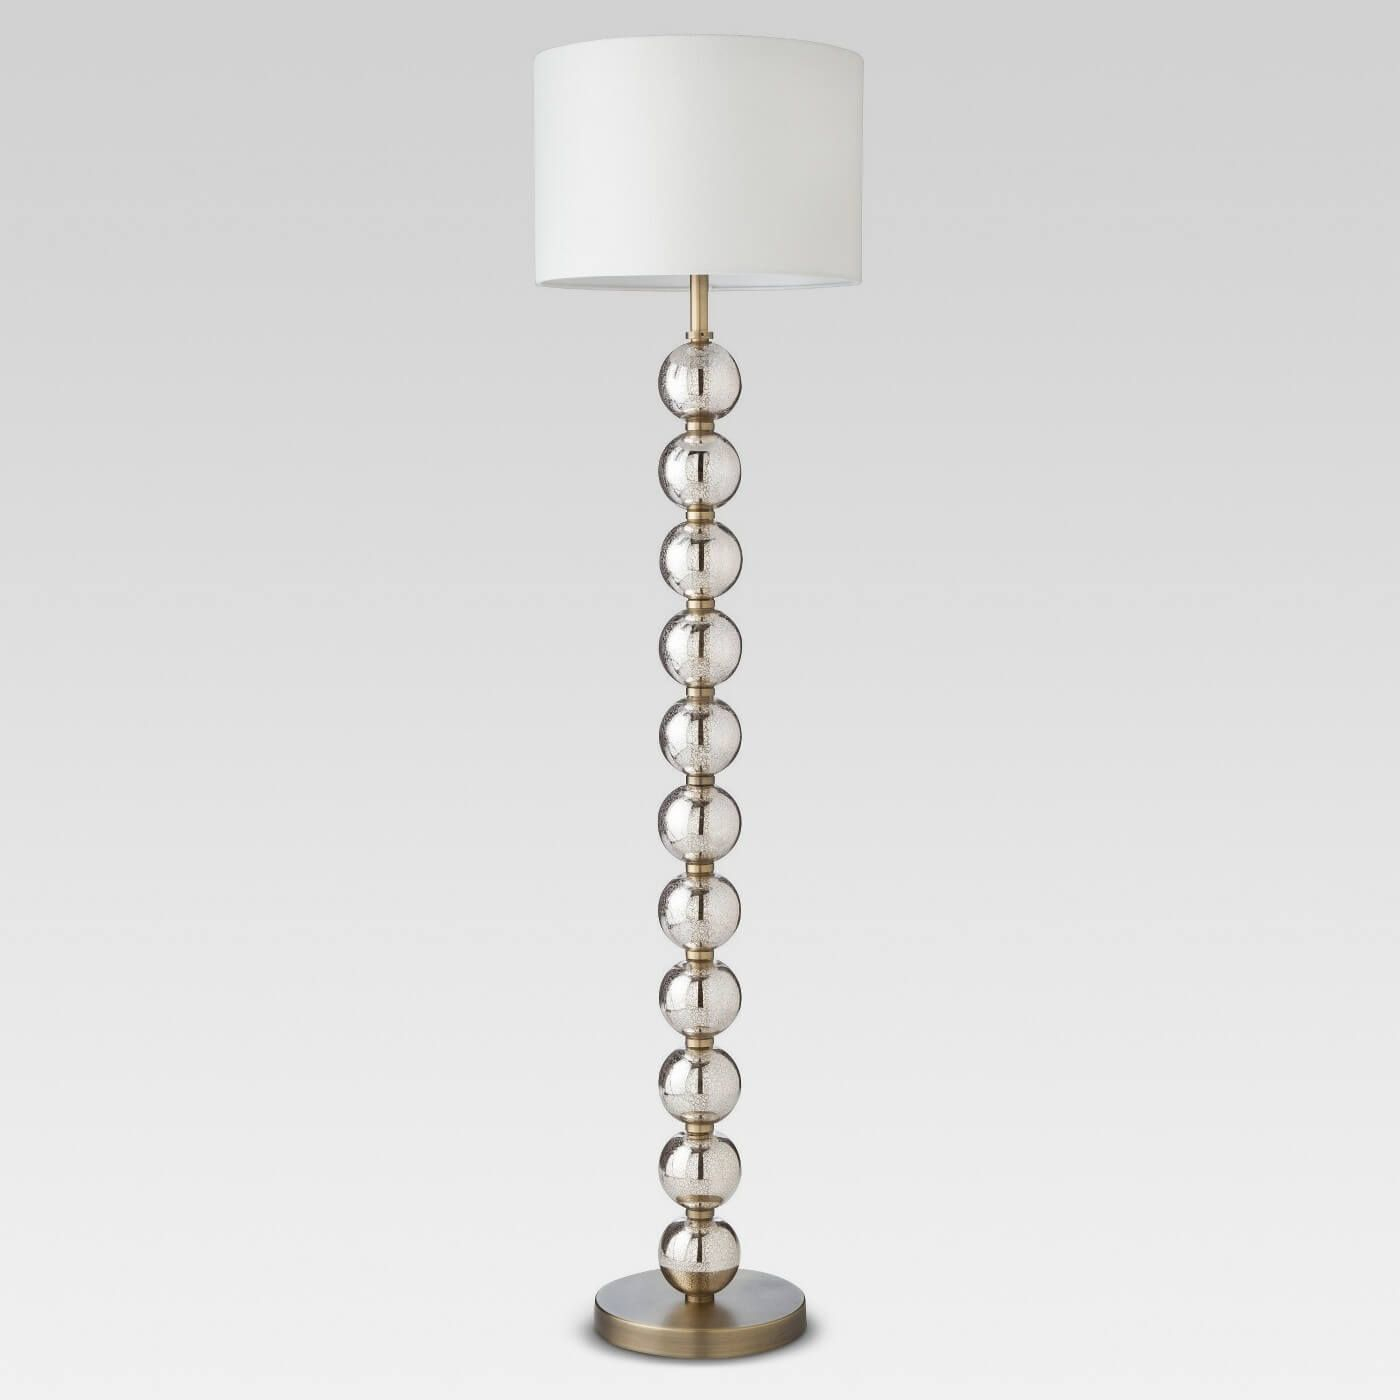 20 Target Floor Lamps That Are Chic Modern Statement regarding sizing 1400 X 1400